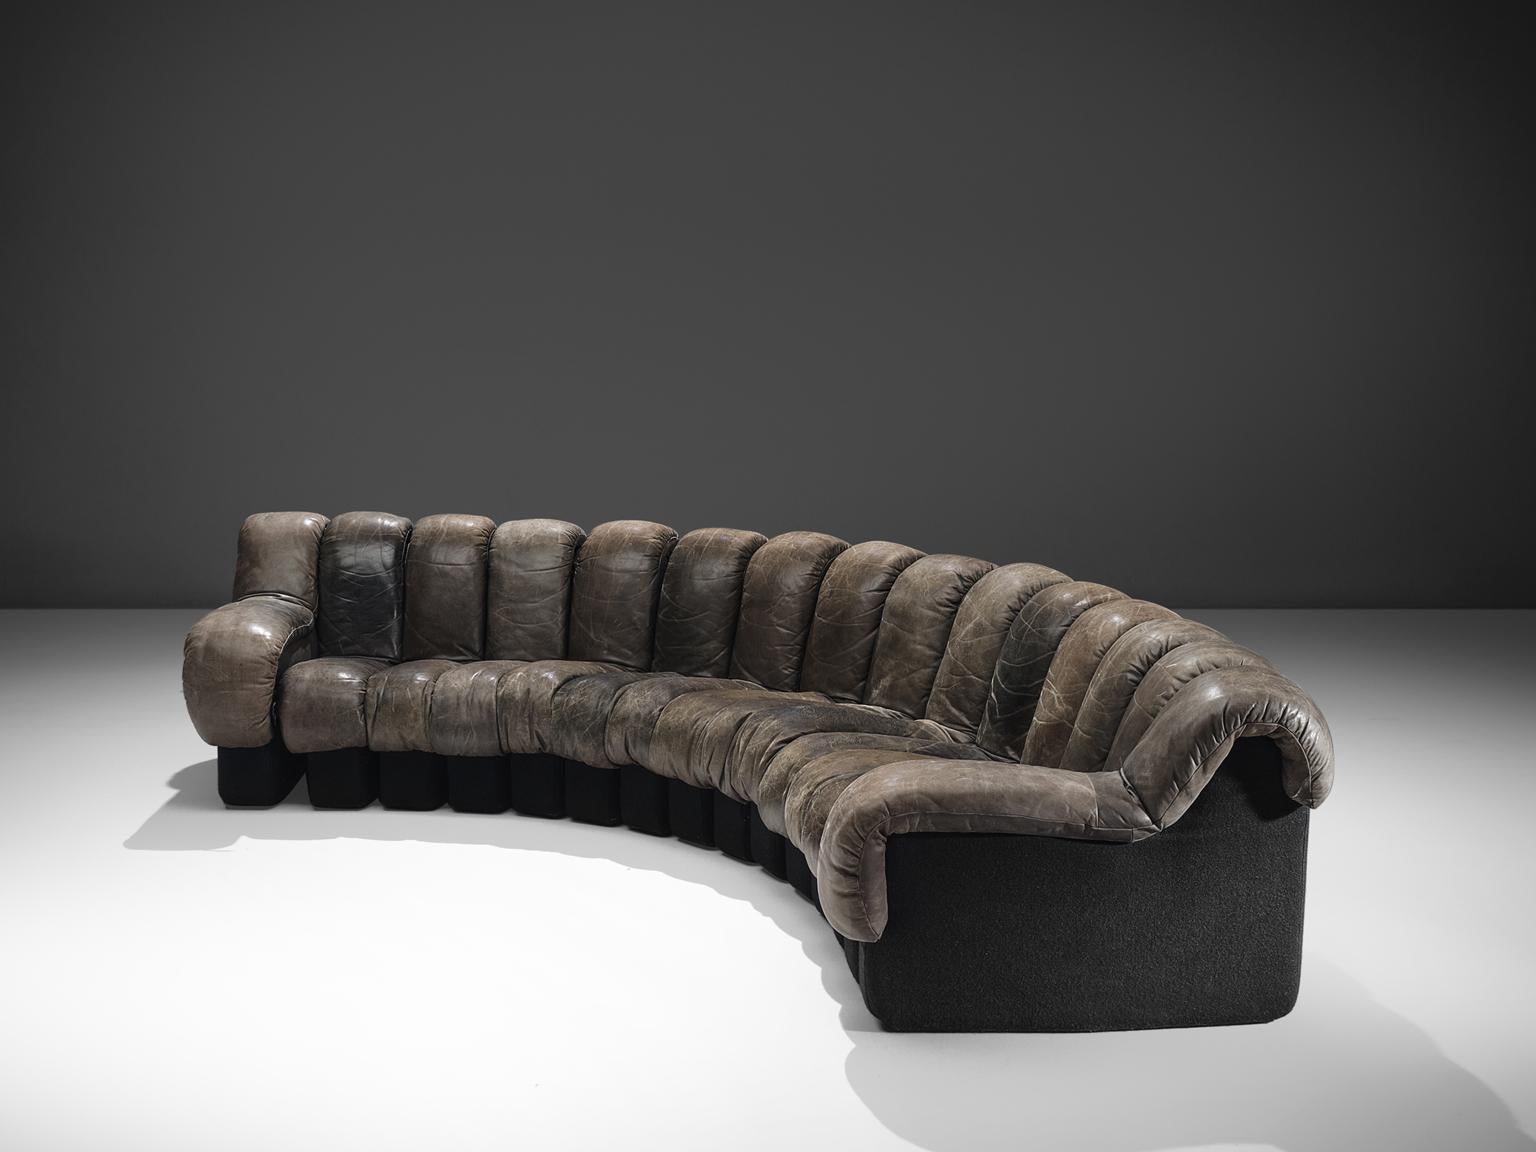 De Sede ‘Snake’ DS-600, 15 elements, dark grey leather, Switzerland, 1972. 

De Sede 'Non Stop' sectional sofa containing 15 pieces in original antracite colored leather, of which two are higher armrests. Any number of pieces can be zipped